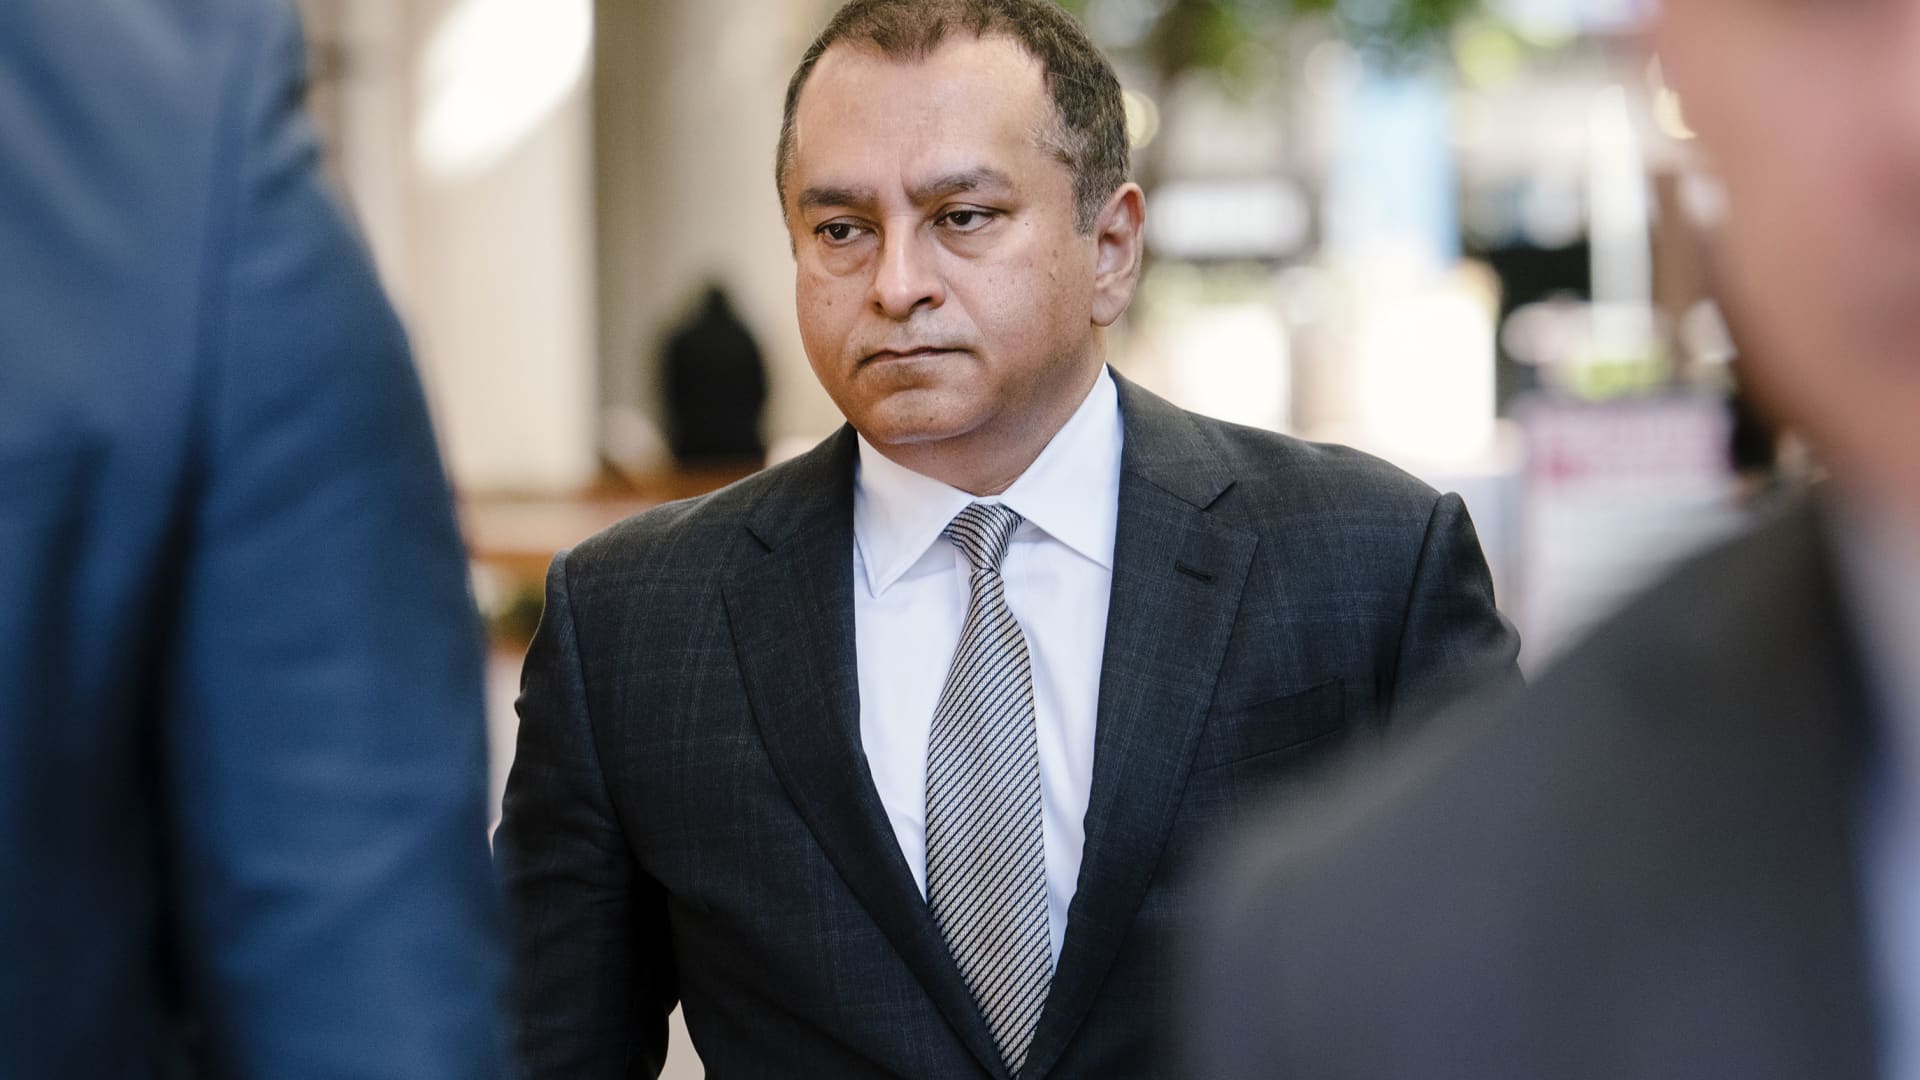 Sunny Balwani, former president and chief operating officer of Theranos Inc., leaves federal court in San Jose, California, Oct. 2, 2019.